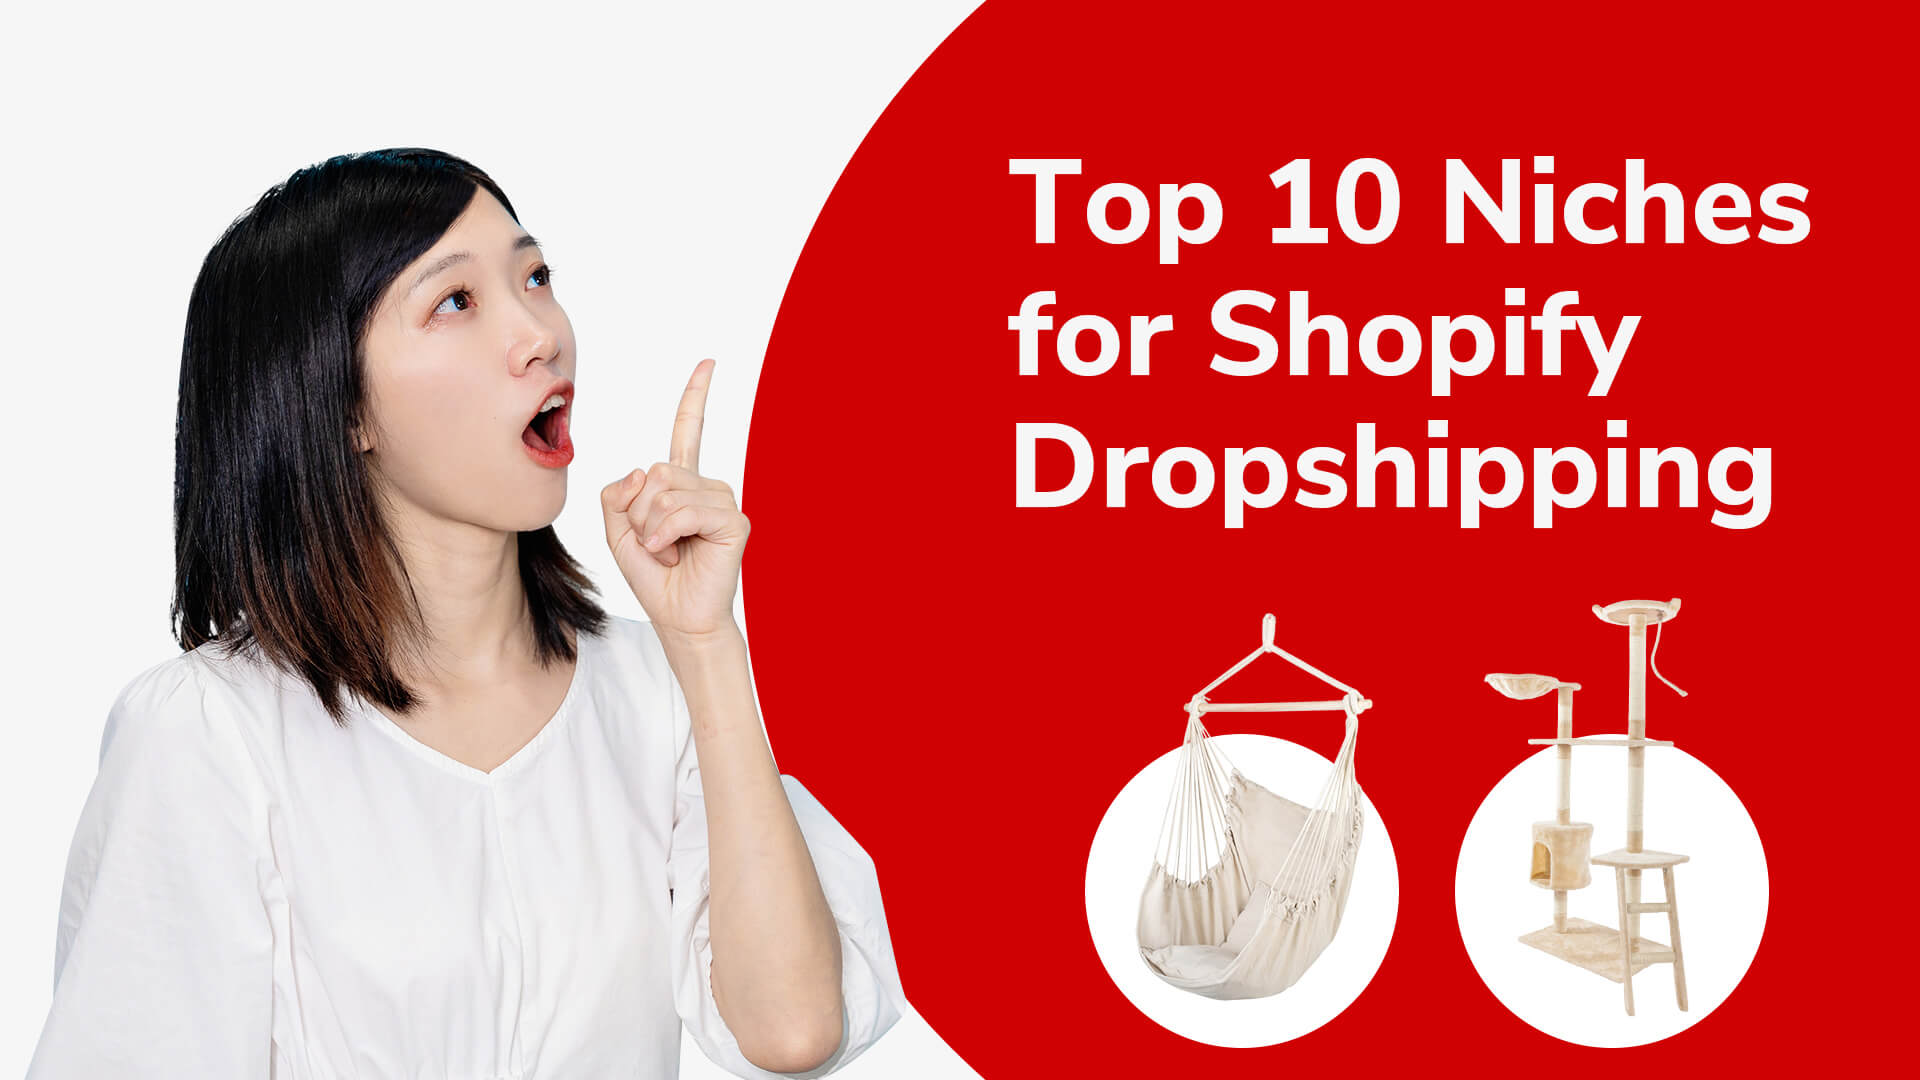 Top 10 Niches for Shopify Dropshipping (2022)